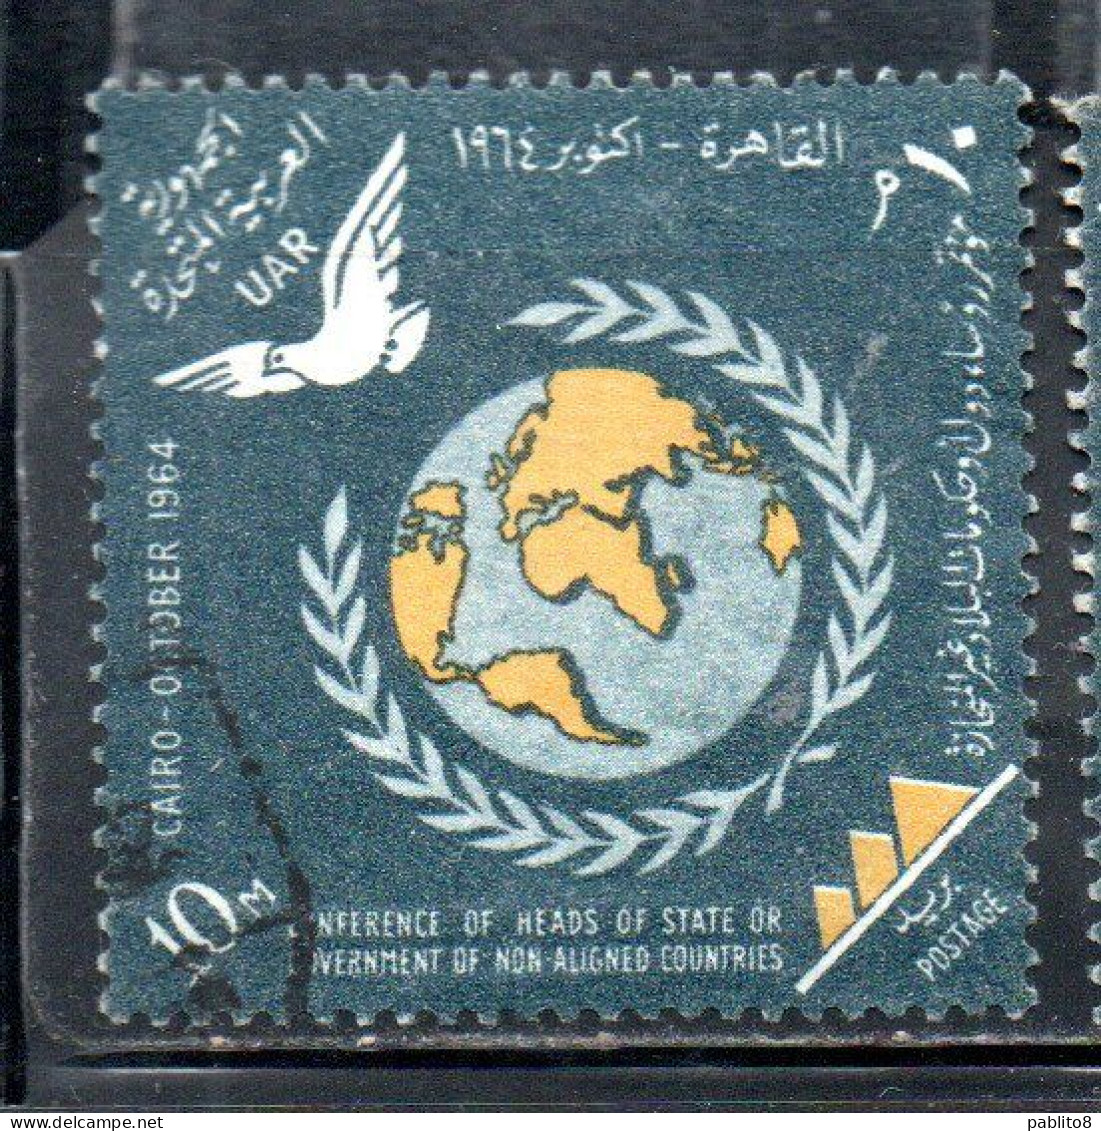 UAR EGYPT EGITTO 1964 CONFERENCE OF HEADS STATE NON-ALIGNED COUNTRIES CAIRO WORLD MAP DOVE PYRAMIDS 10m USED USATO OBLIT - Used Stamps